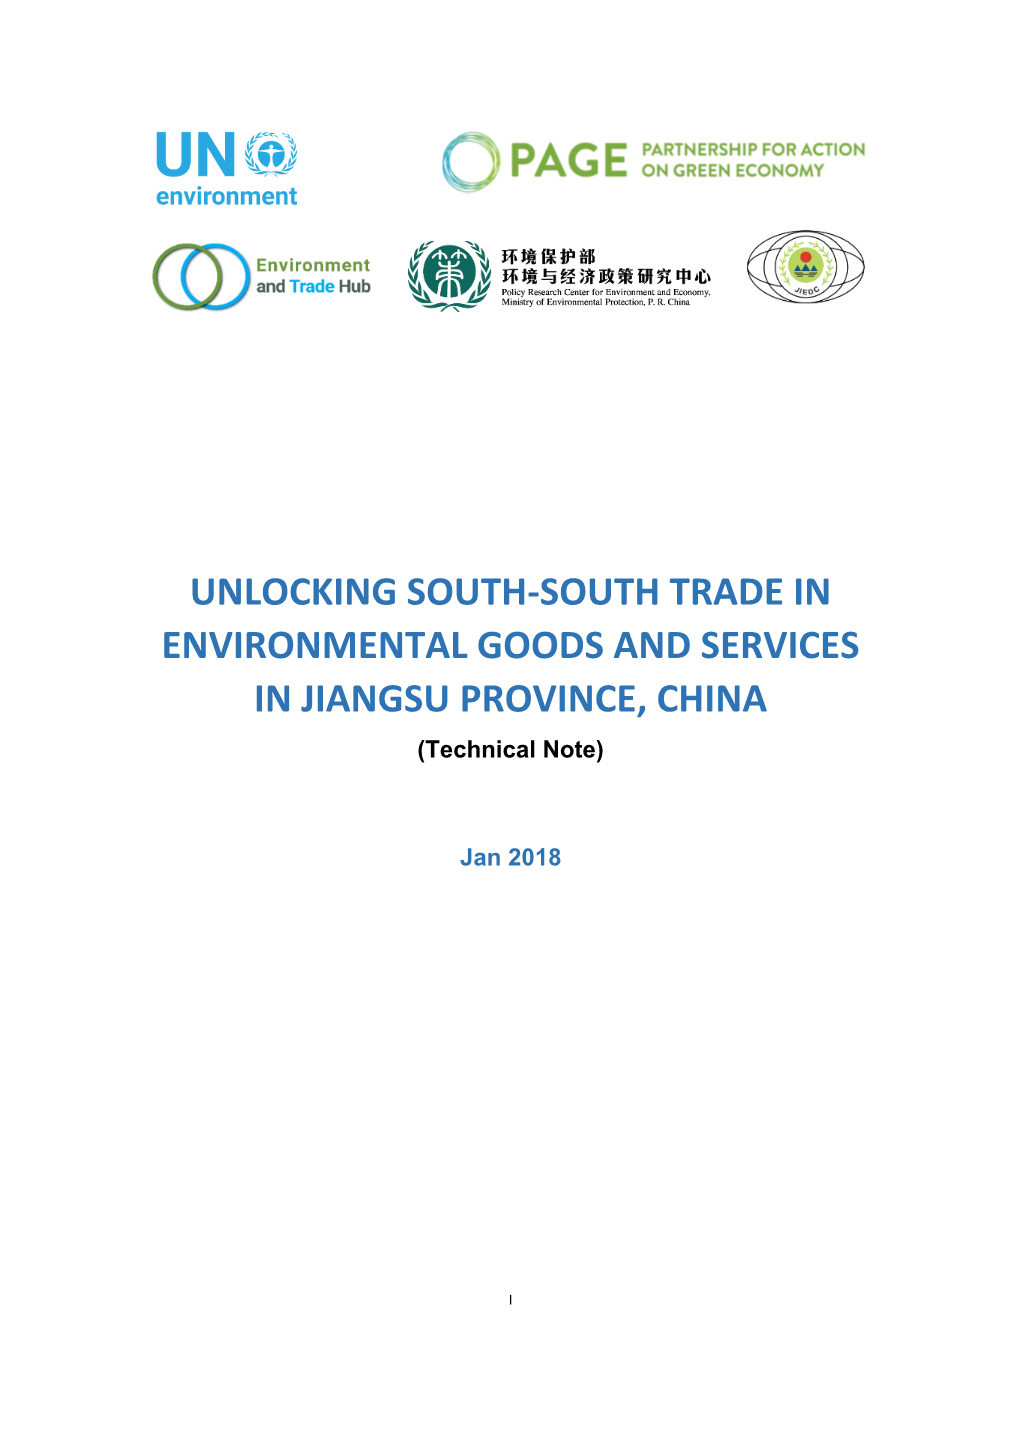 Technical Note: Unlocking South-South Trade in Environmental Goods and Services in Jiangsu Province, China, 2019